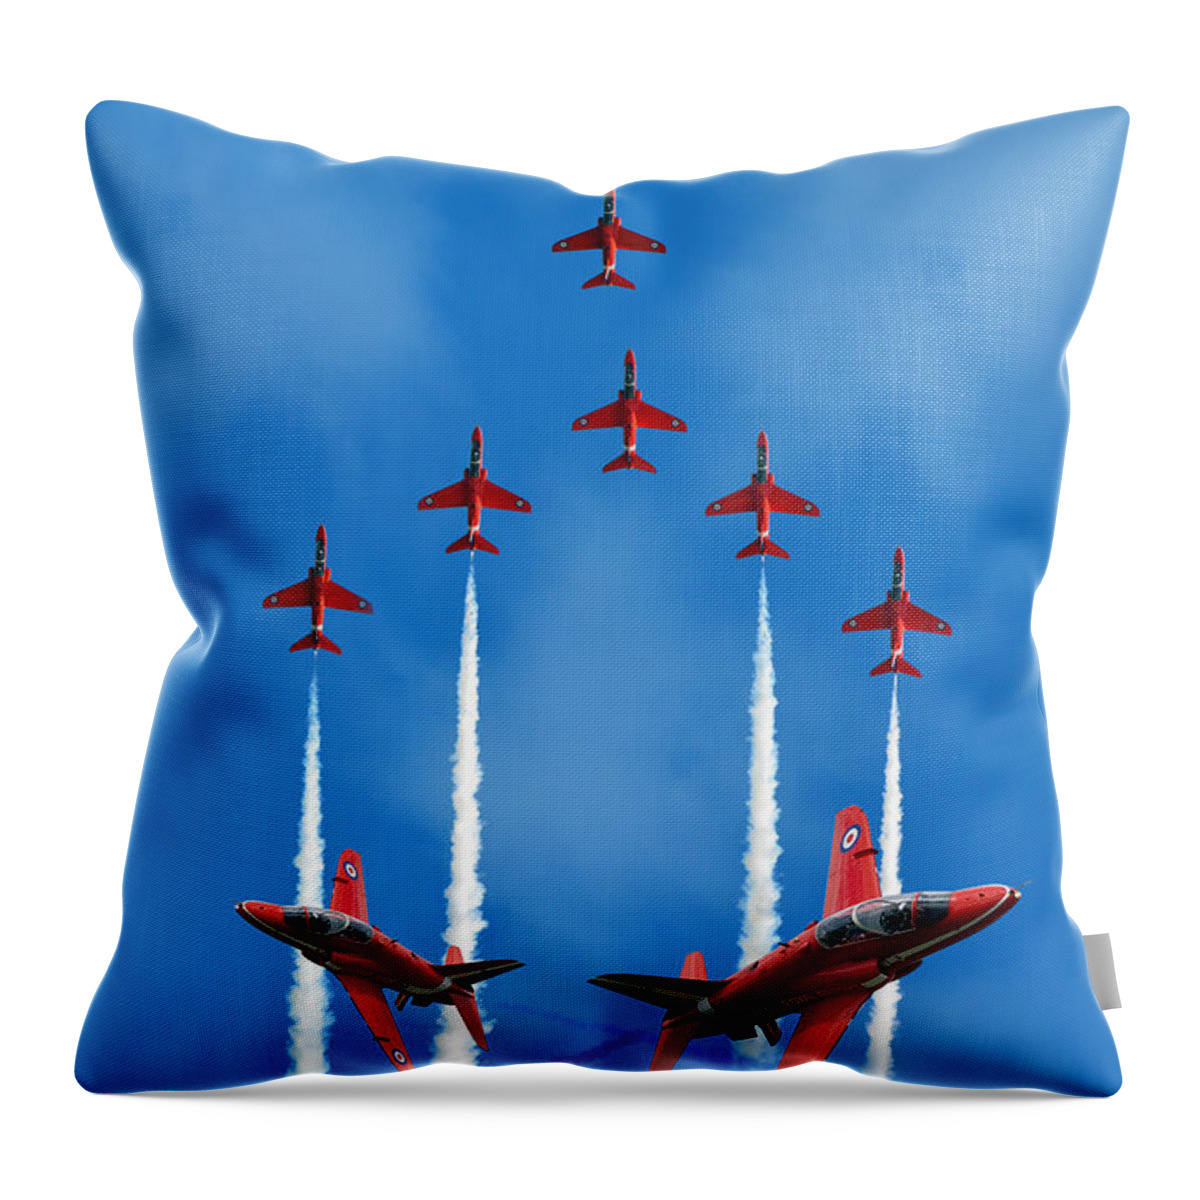 The Red Arrows Throw Pillow featuring the digital art The Red Arrows #4 by Airpower Art